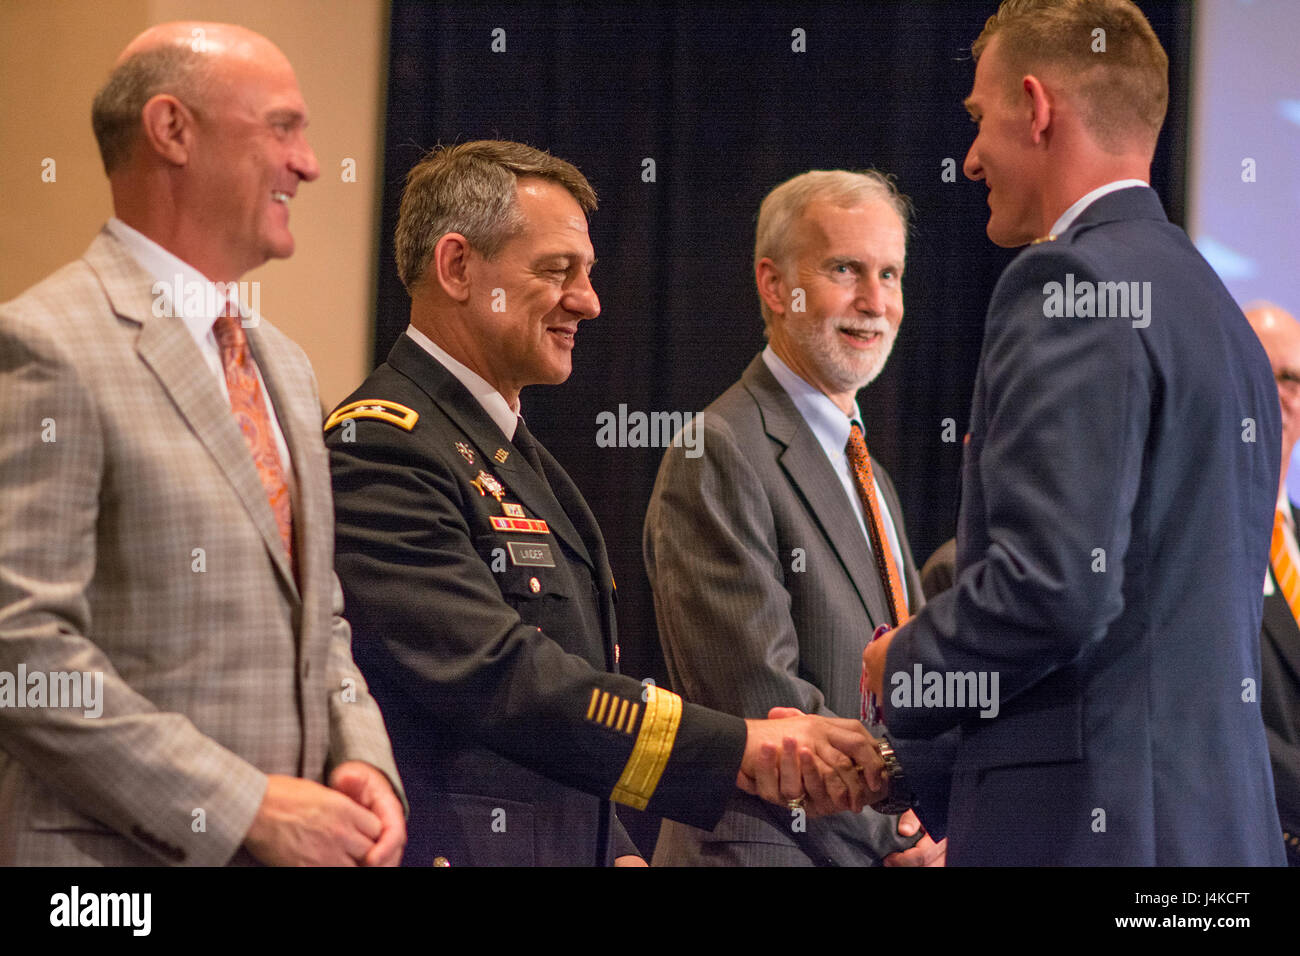 U.S. Army Maj. Gen. James B. Linder, commander of the U.S. Army John F. Kennedy Special Warfare Command, congratulates brand new 2nd Lt. Sean Mac Lain during Clemson University’s Reserve Officers’ Training Corps commissioning ceremony, May 10, 2017. Mac Lain was a member of both the 2016 Clemson Tigers National Football Championship team and the Clemson ROTC Pershing Rifles 2016 national champion drill and ceremony team. (U.S. Army Reserve photo by Staff Sgt. Ken Scar) Stock Photo